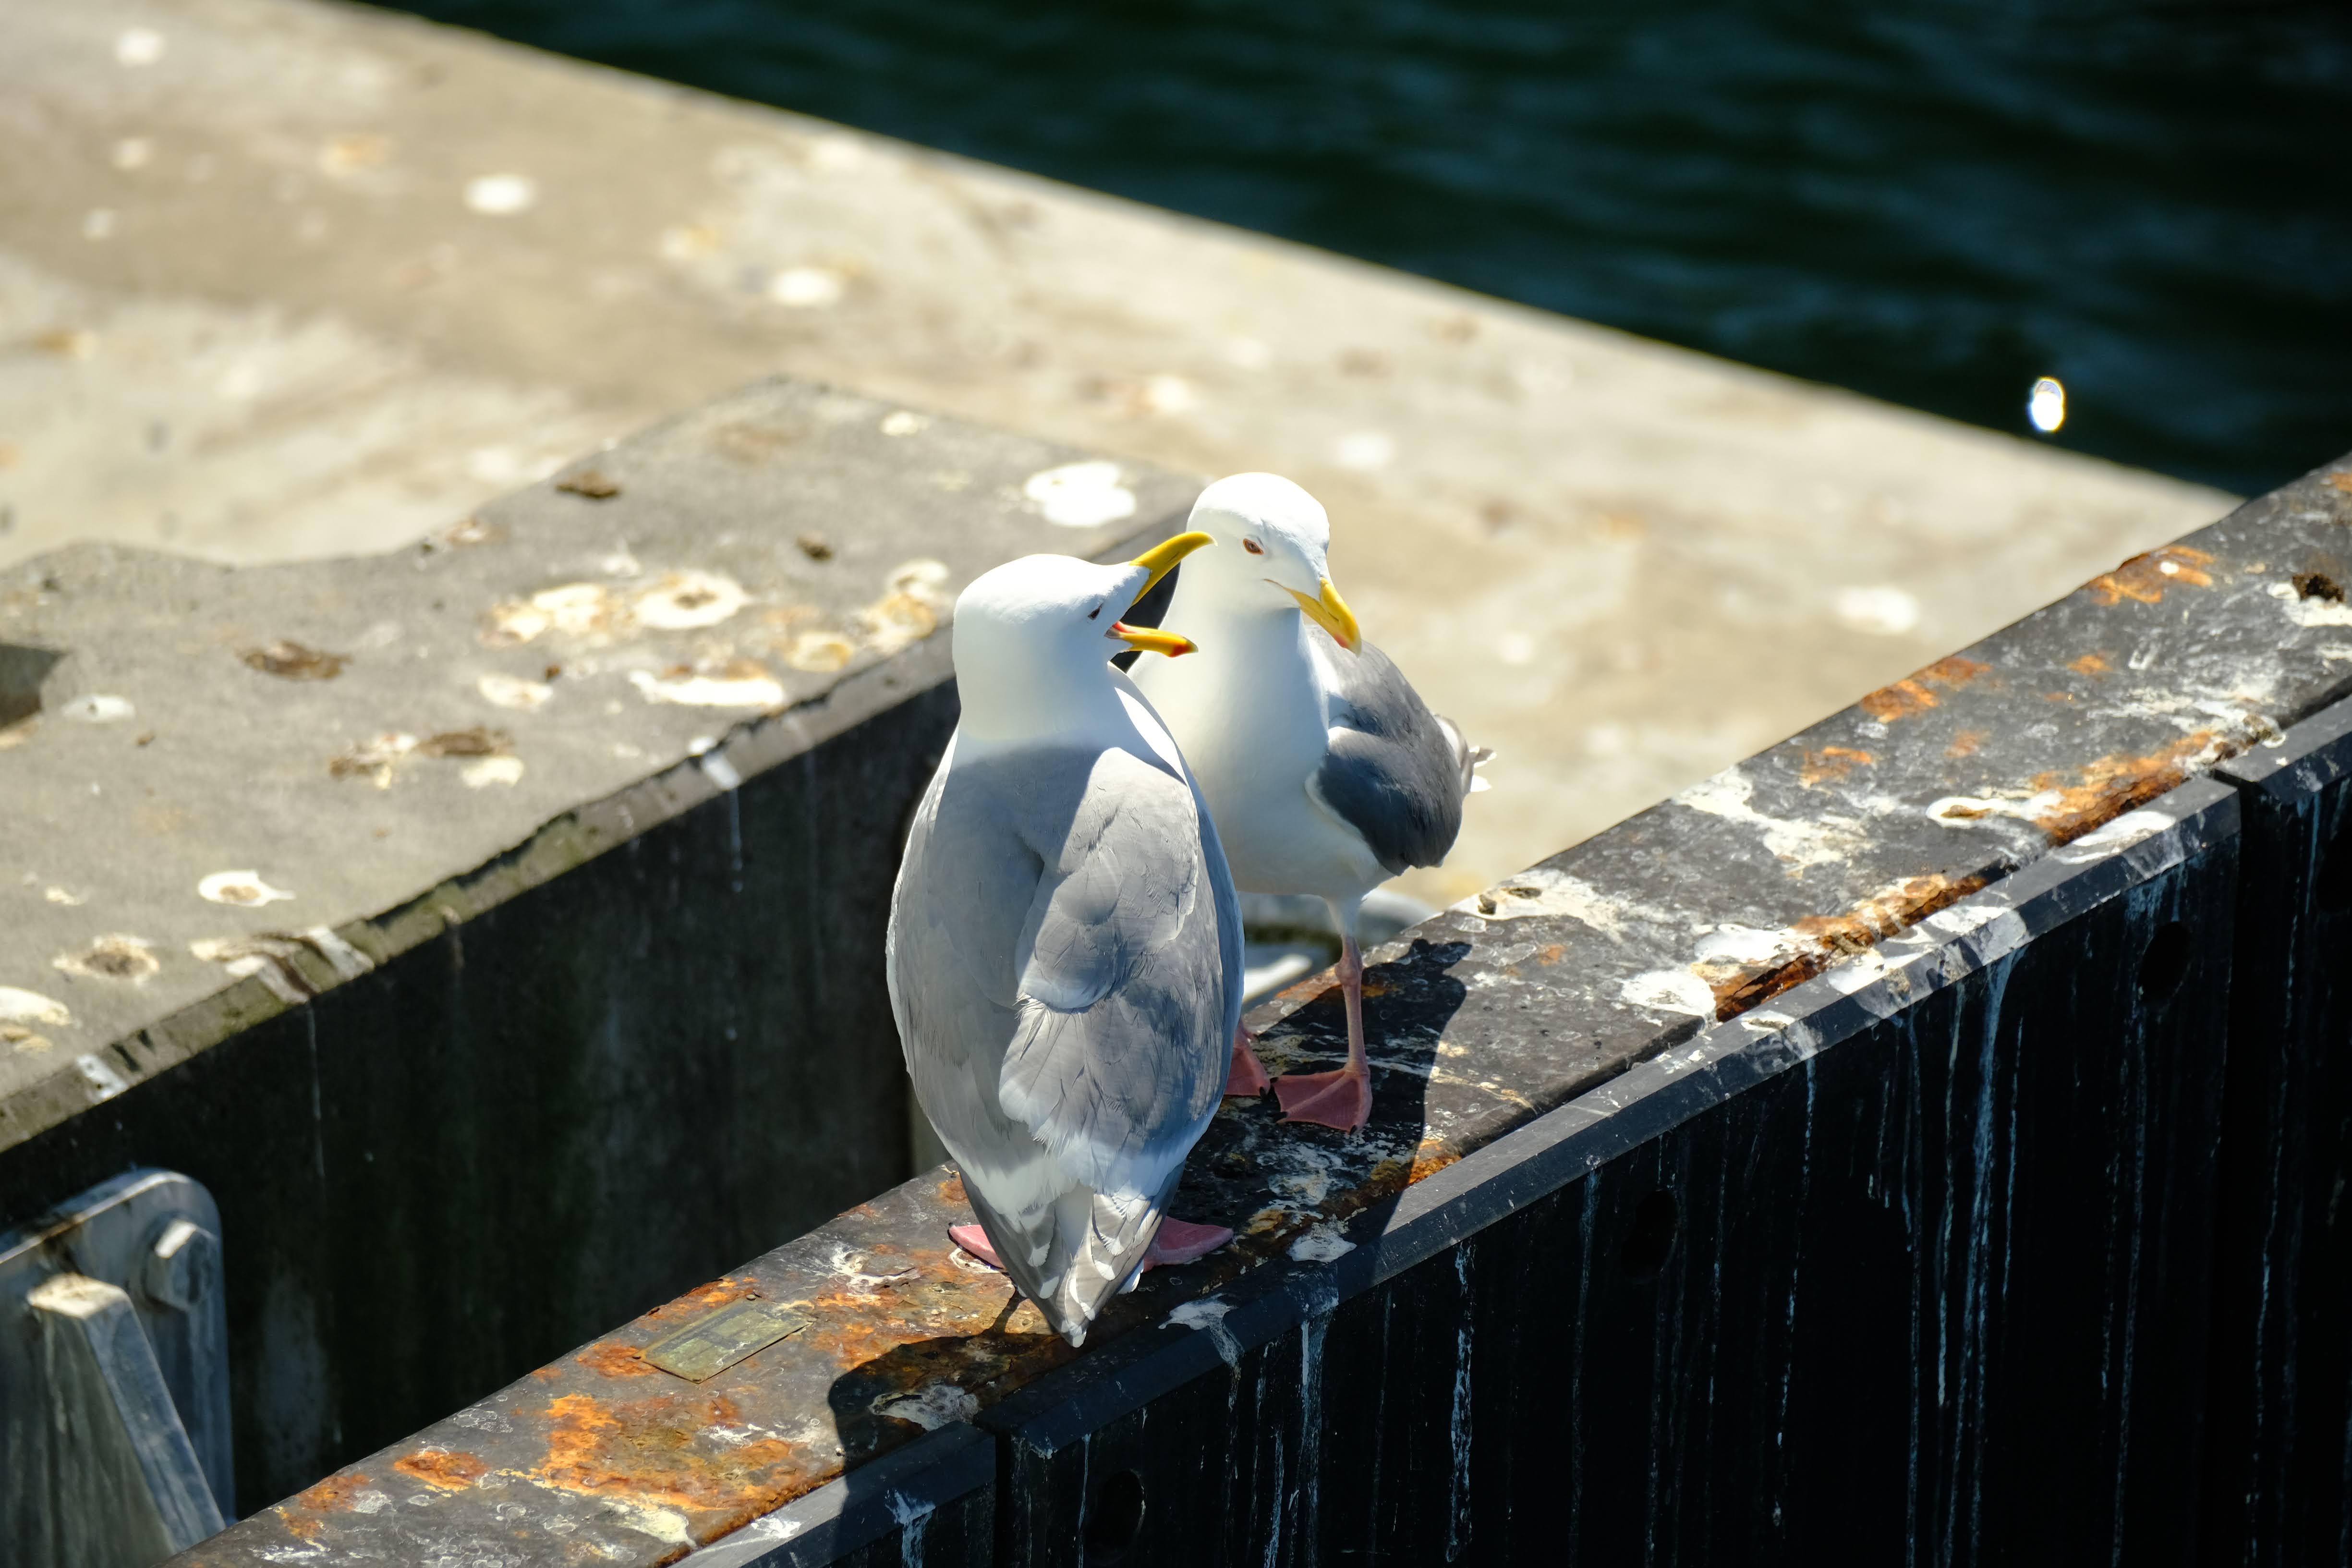 Image unrelated to post. A seagull with eir beak open, looking like ey are yelling in the ear of the seagull next to them.